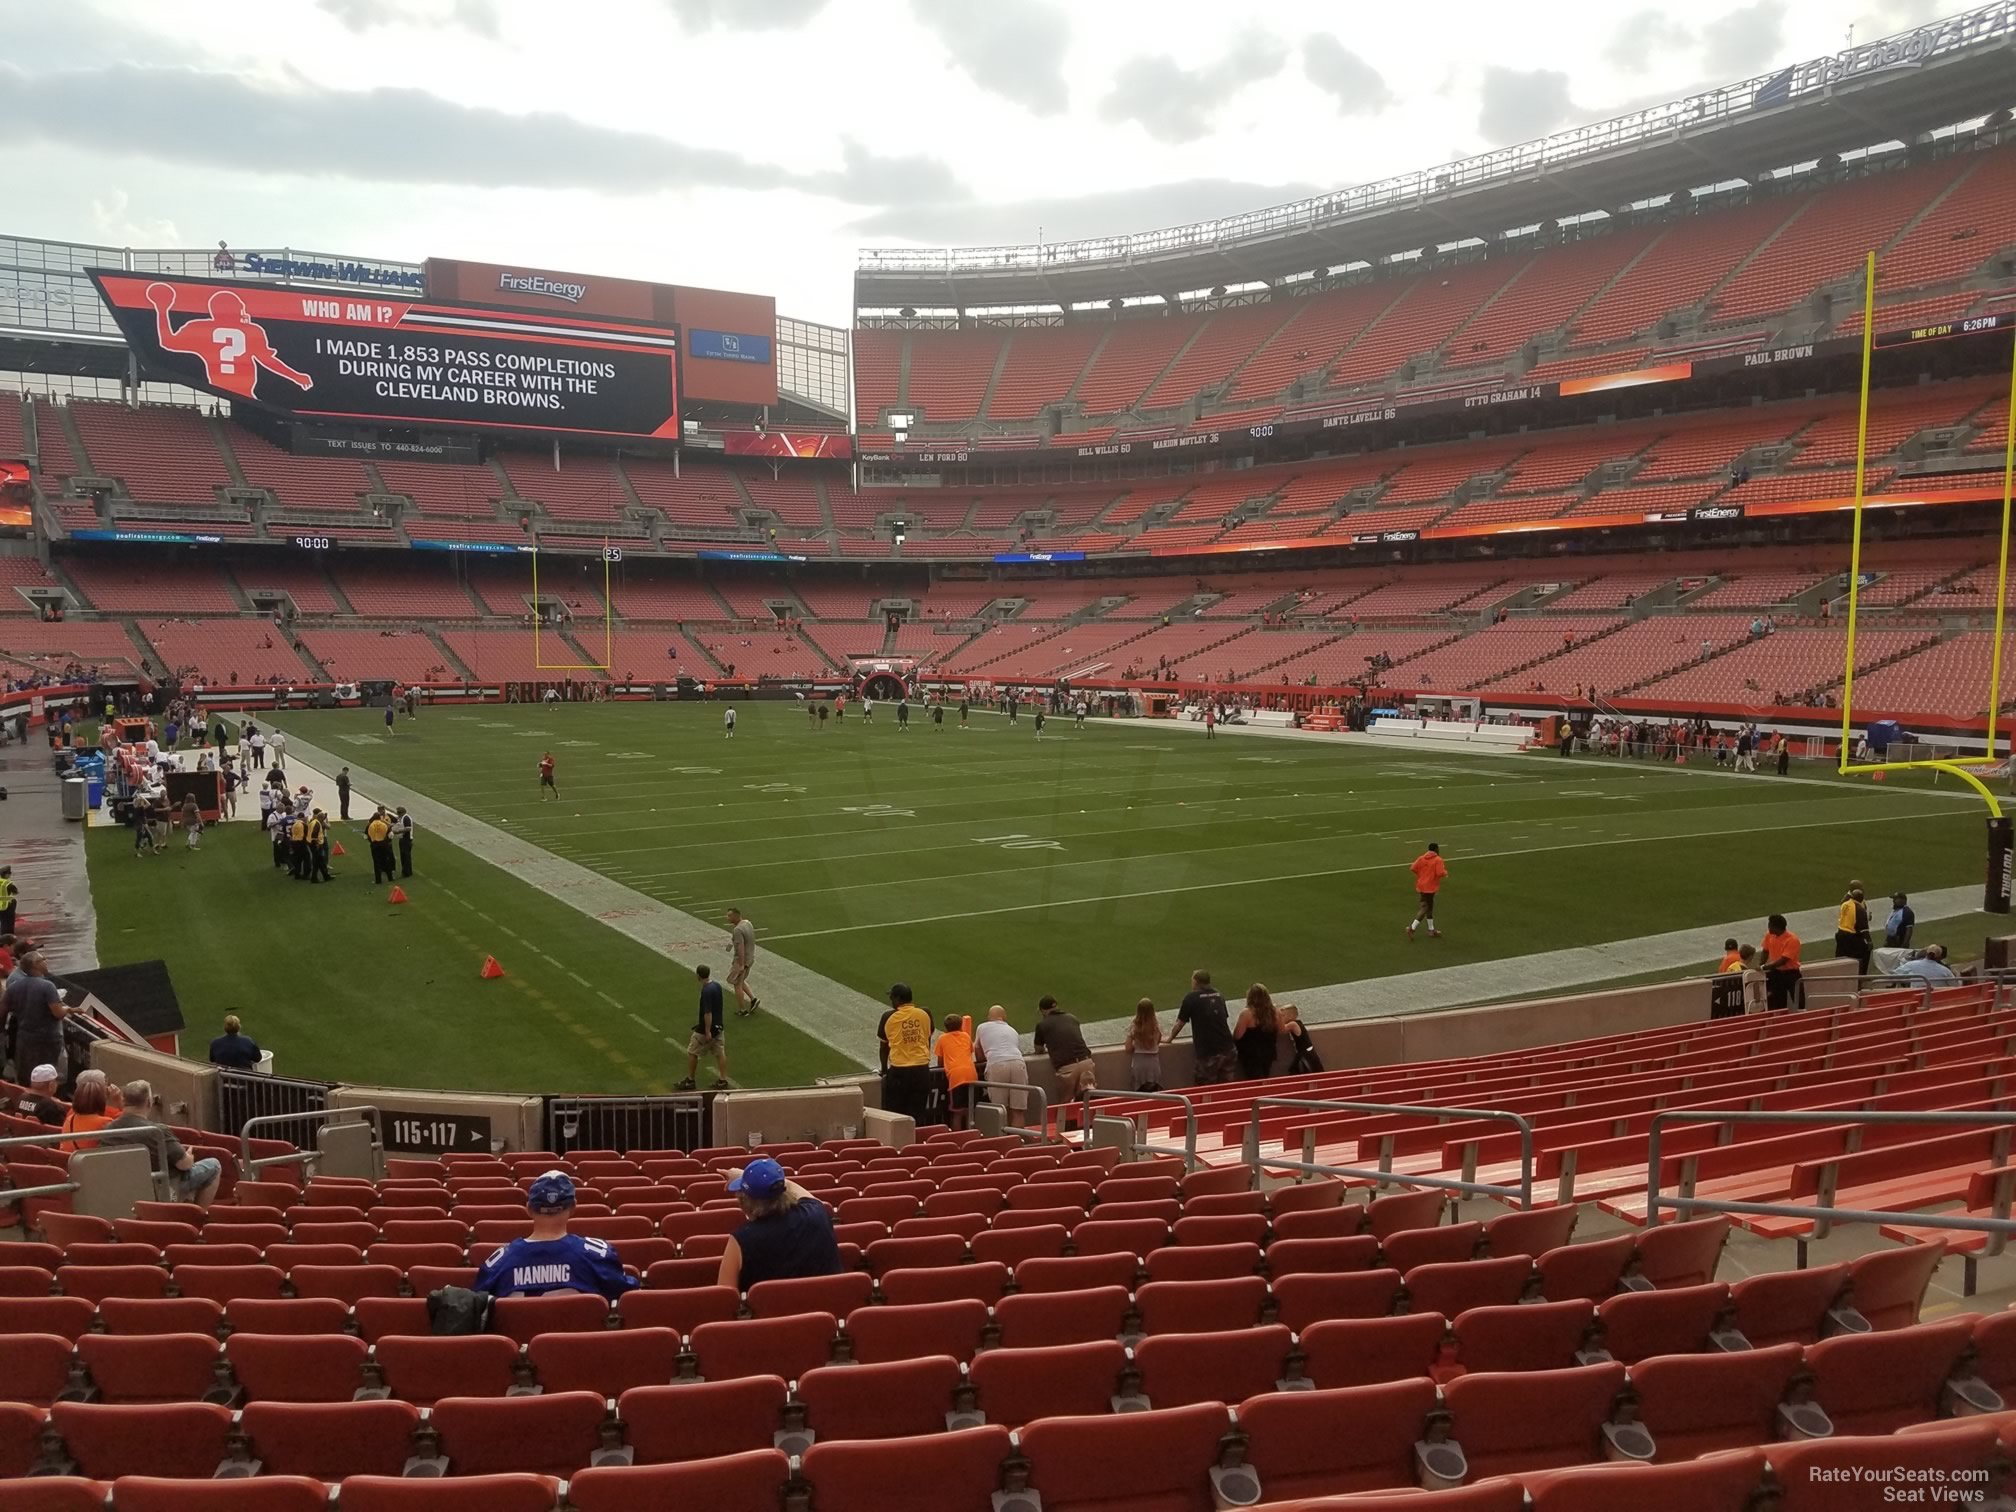 section 117, row 17 seat view  - cleveland browns stadium